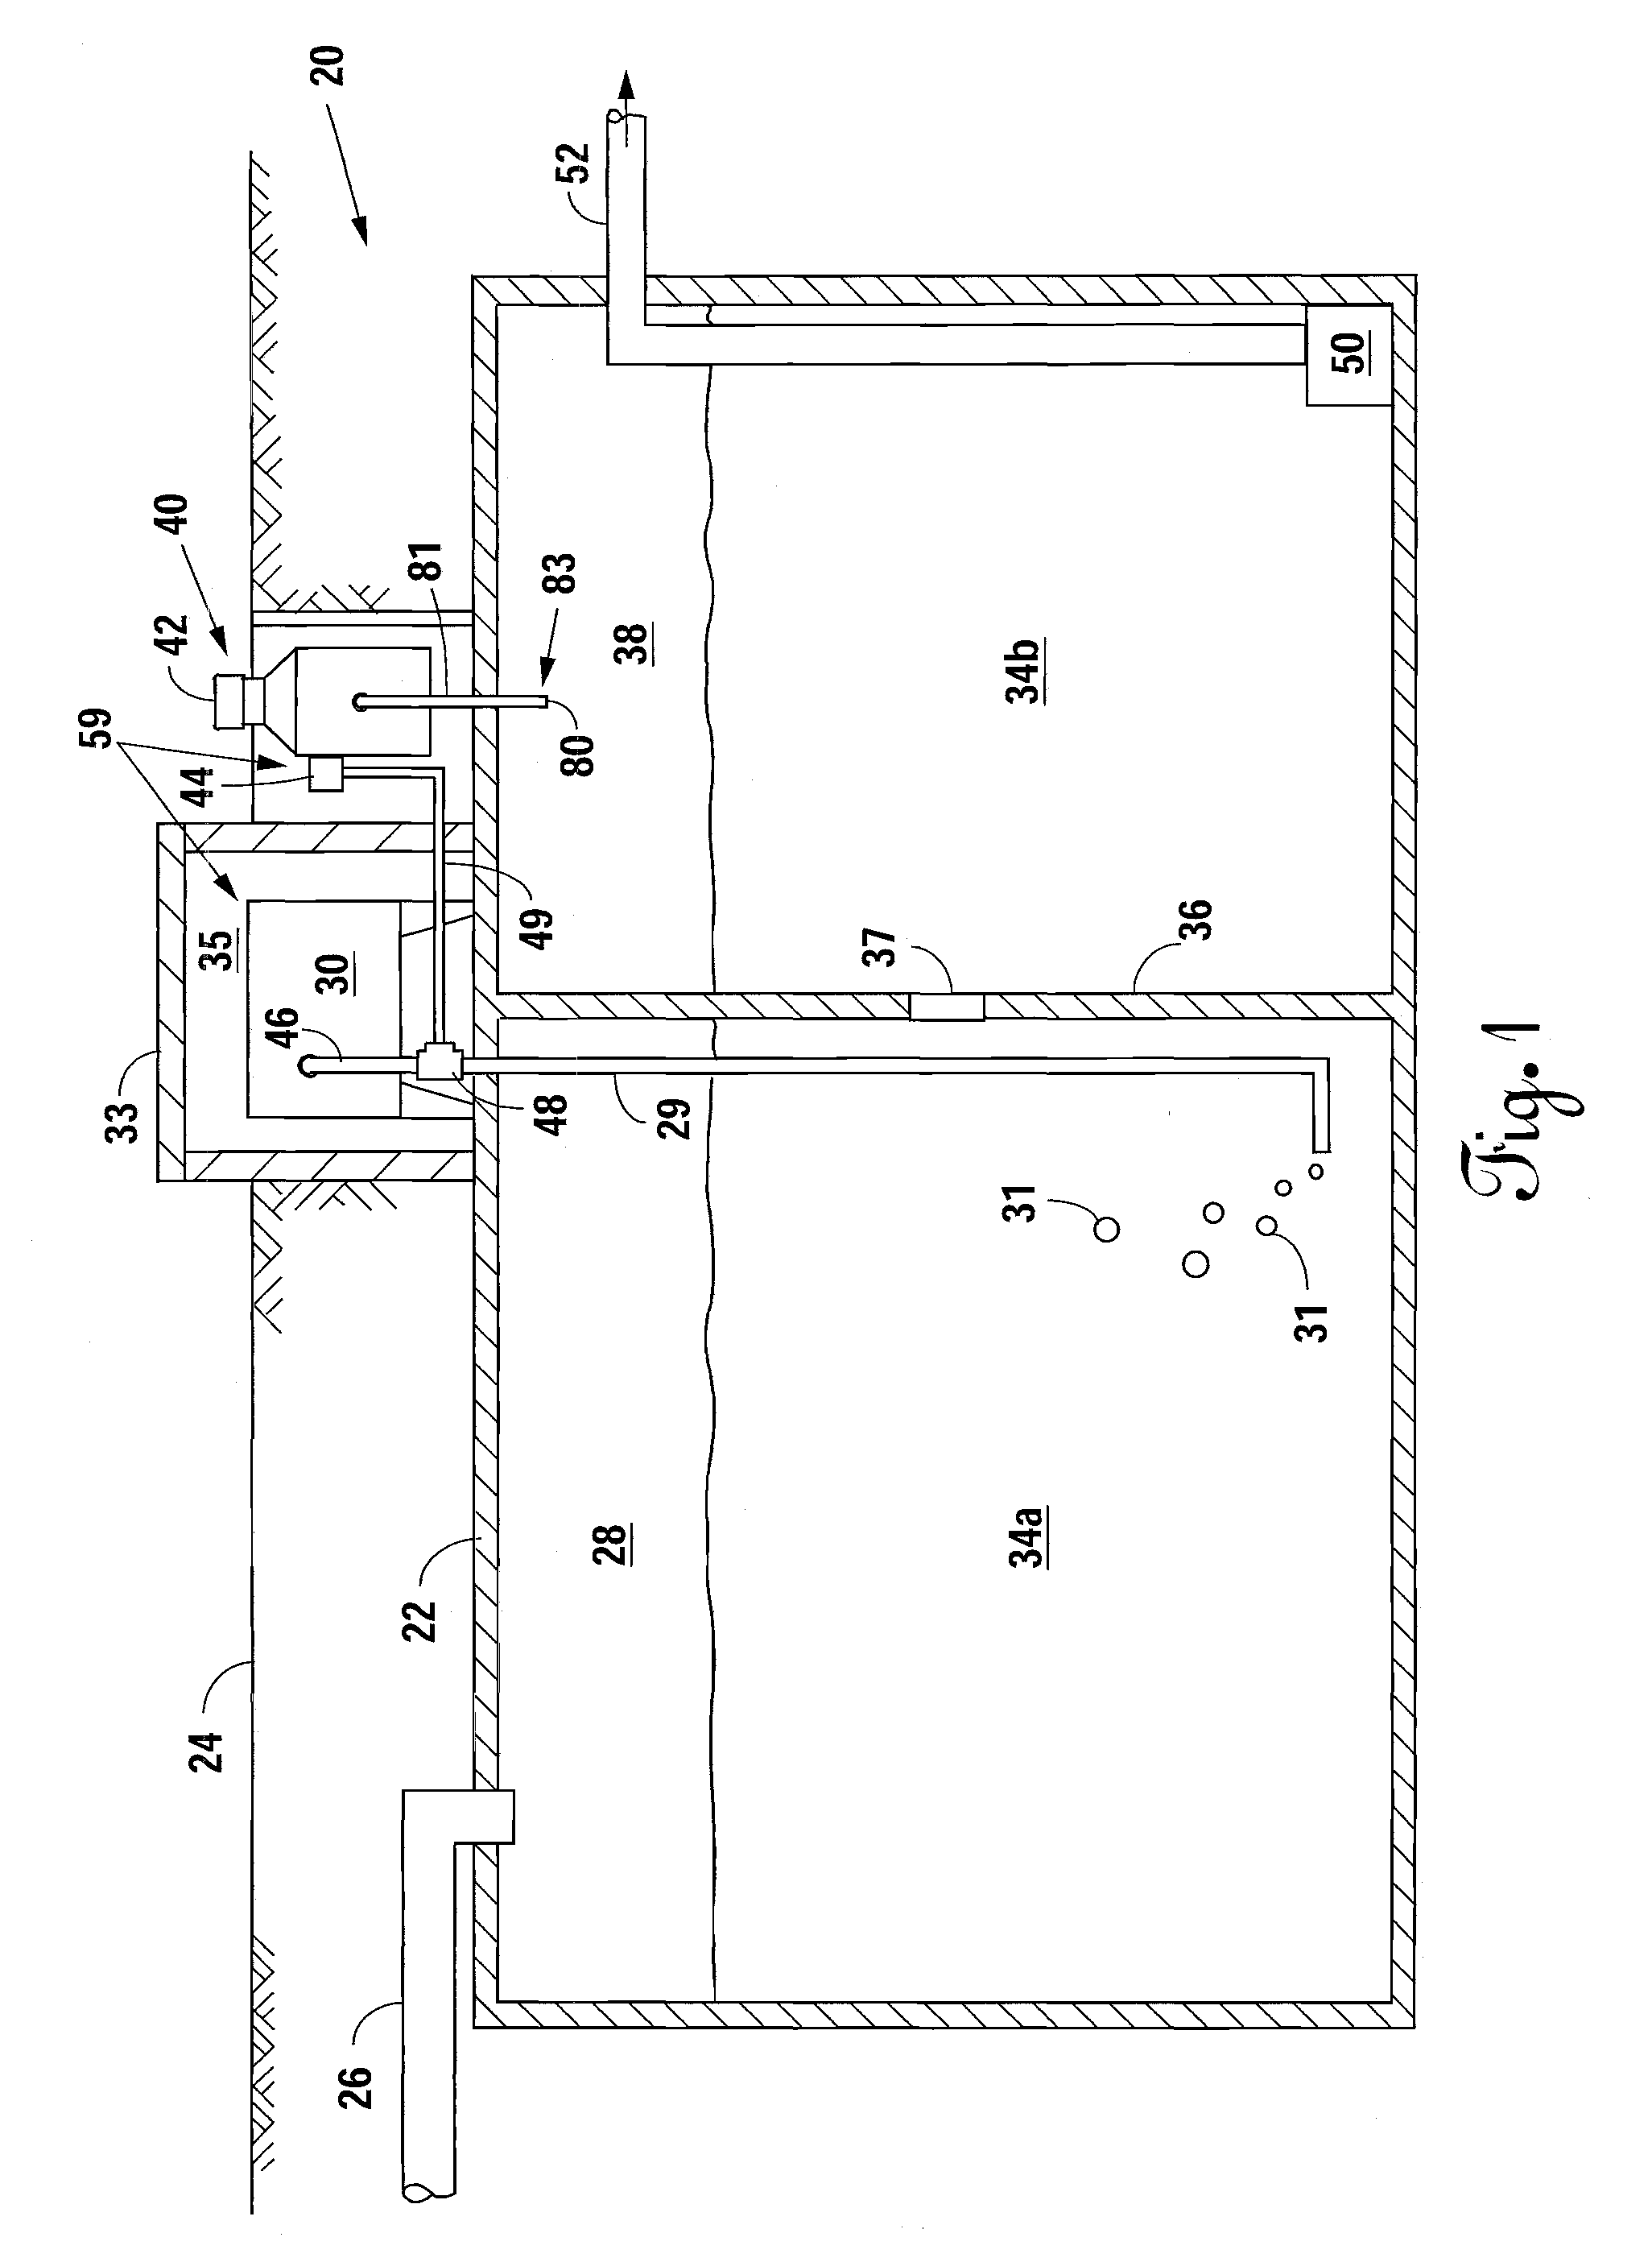 Pressure-Actuated Liquid Disinfectant Dispenser and Method for an Aerobic Treatment System